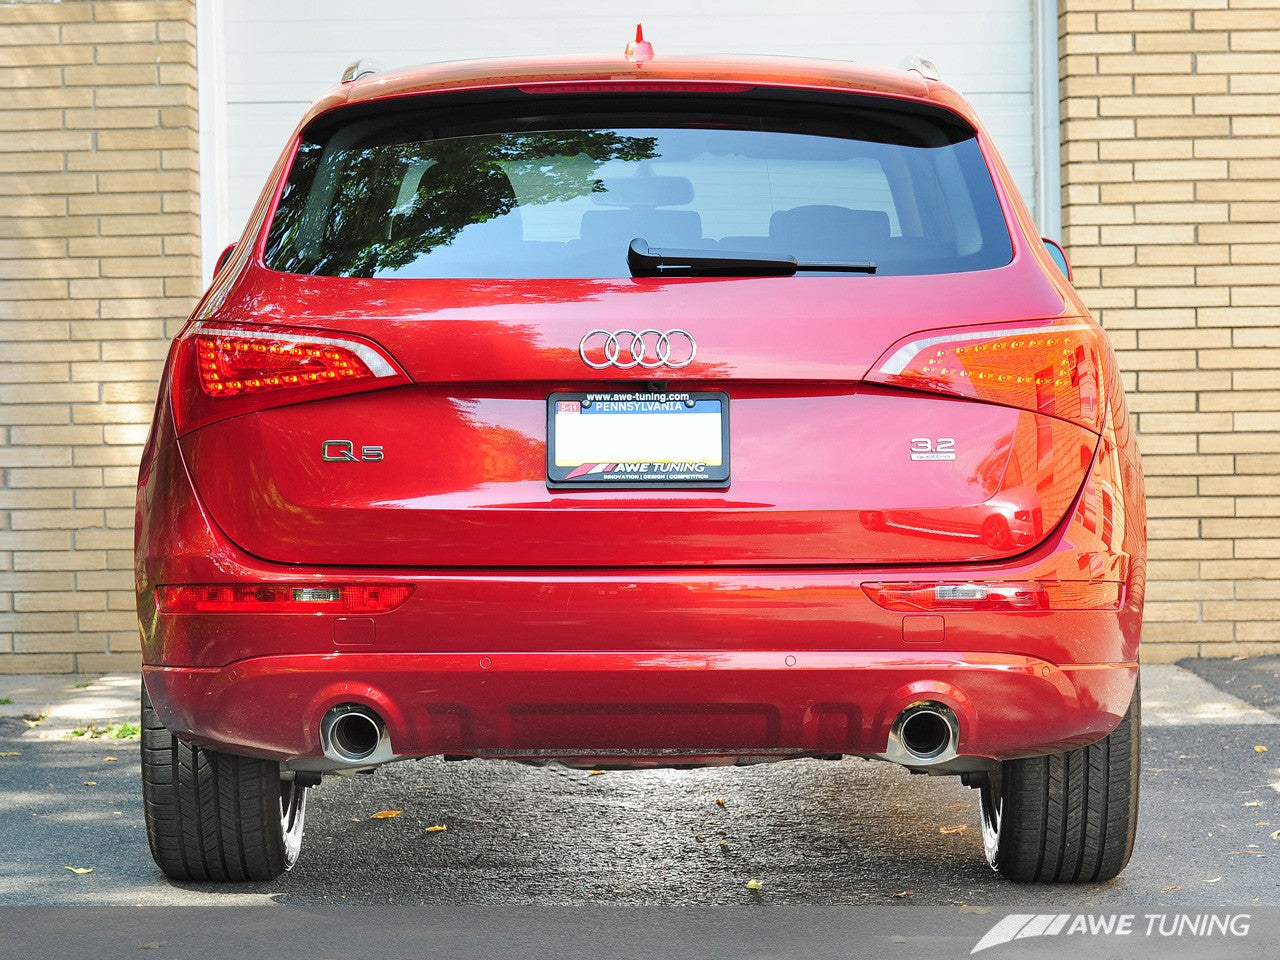 AWE Non-Resonated Exhaust System (Downpipe-Back) for 8R Q5 3.2L -- Polished Silver Tips